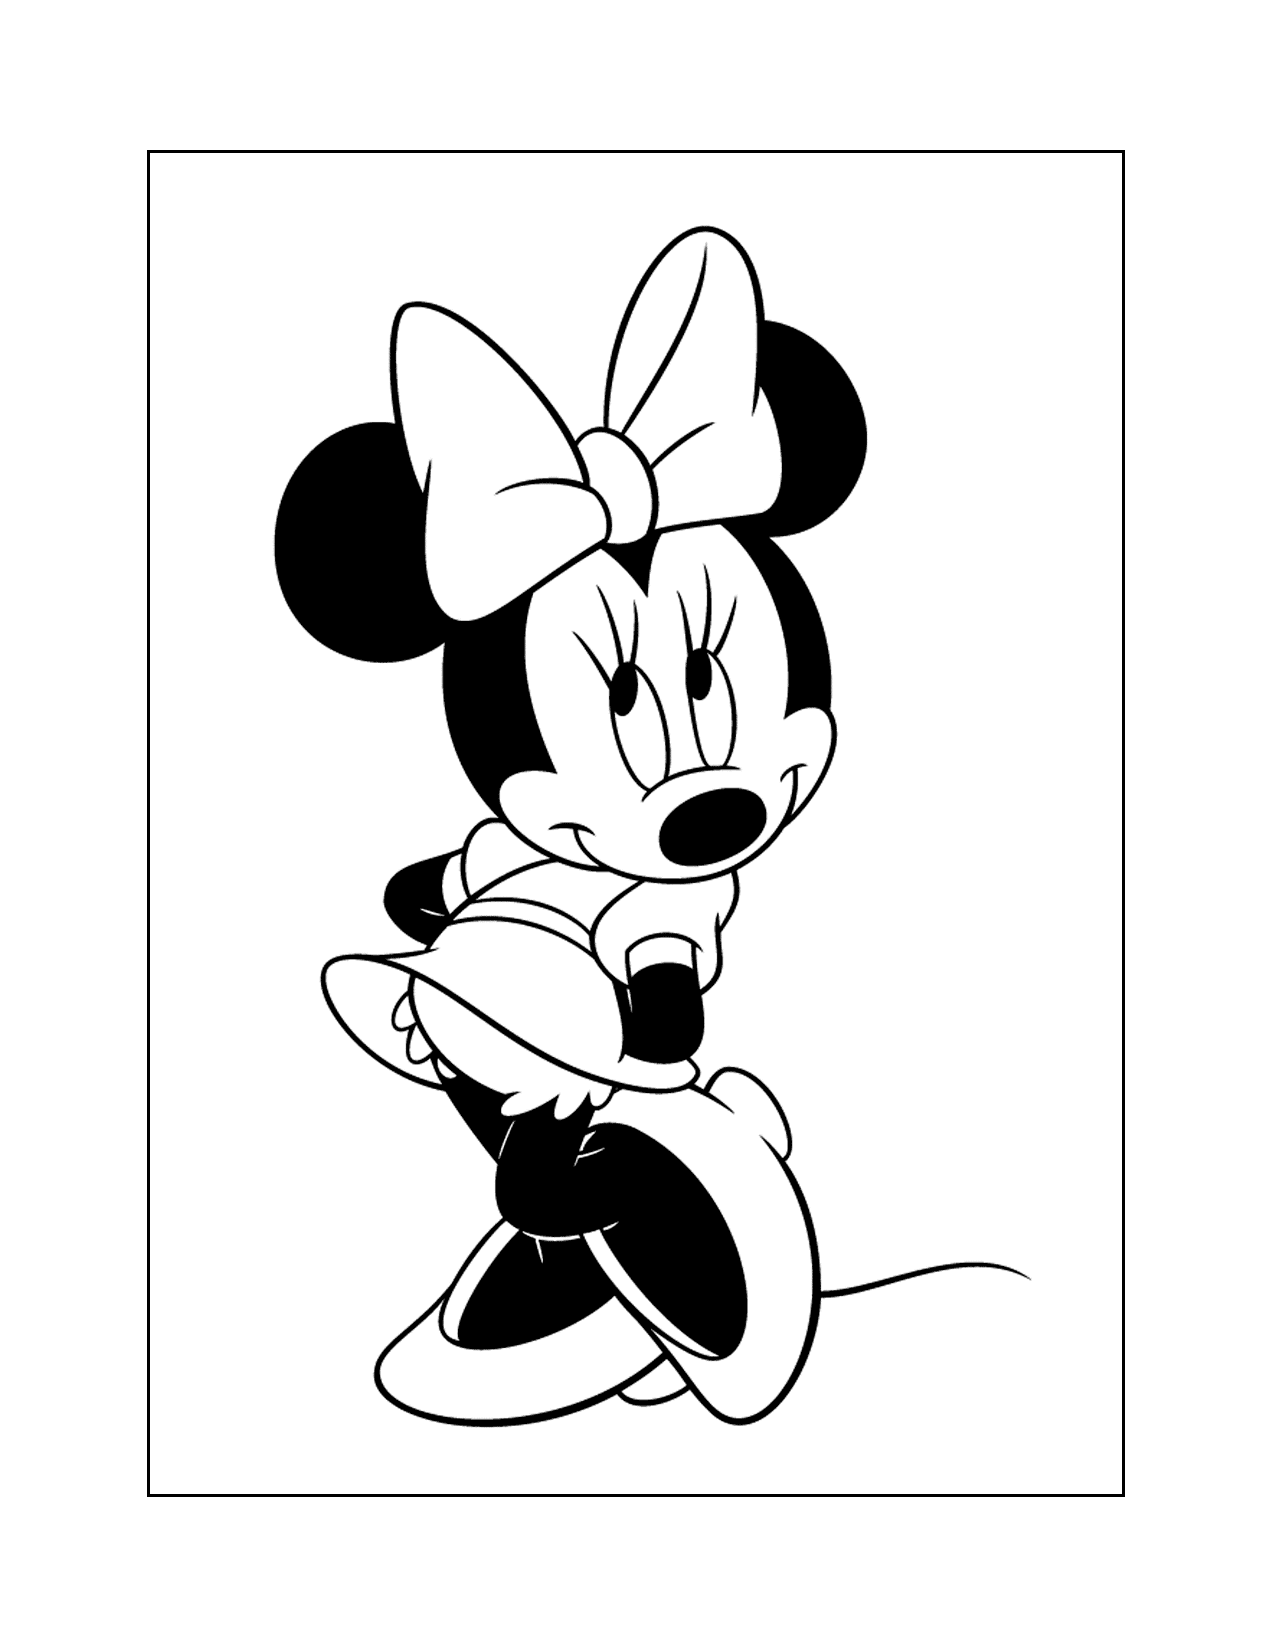 Bashful Minnie Mouse Coloring Page